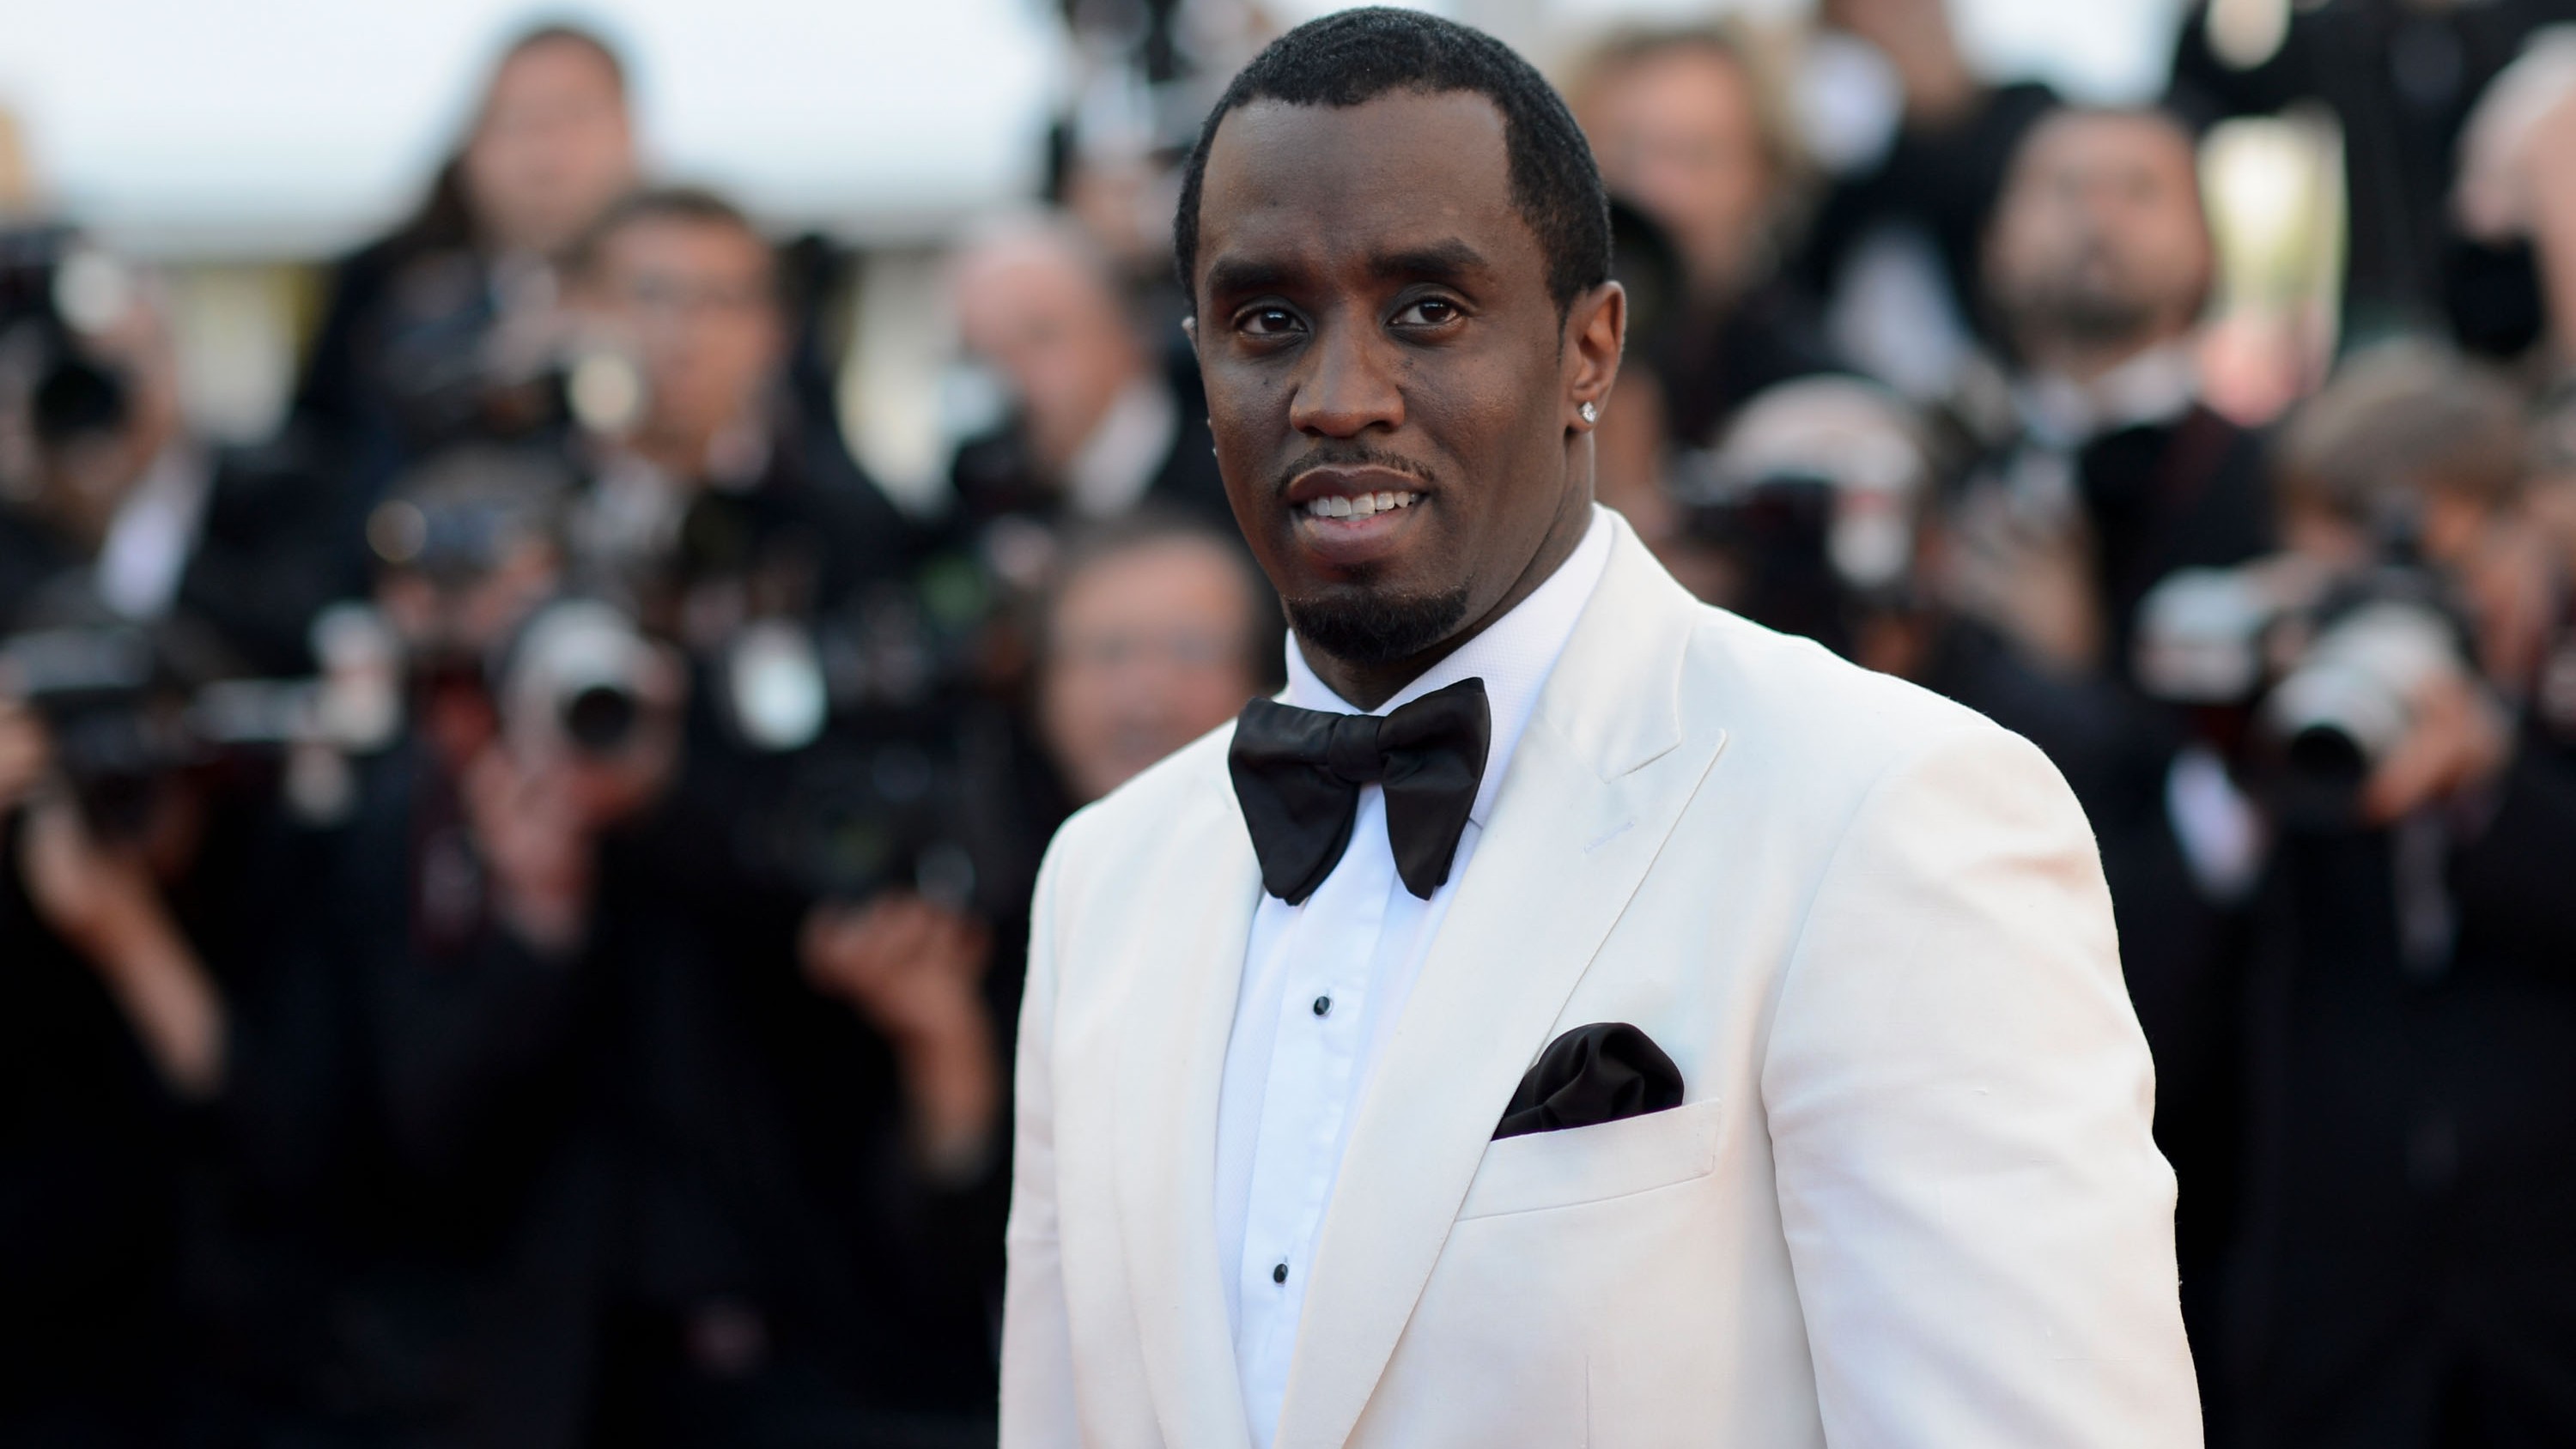  The daily gossip: Sean 'Diddy' Combs accused of rape and abuse, Dana Carvey mourns the death of his son, and more 